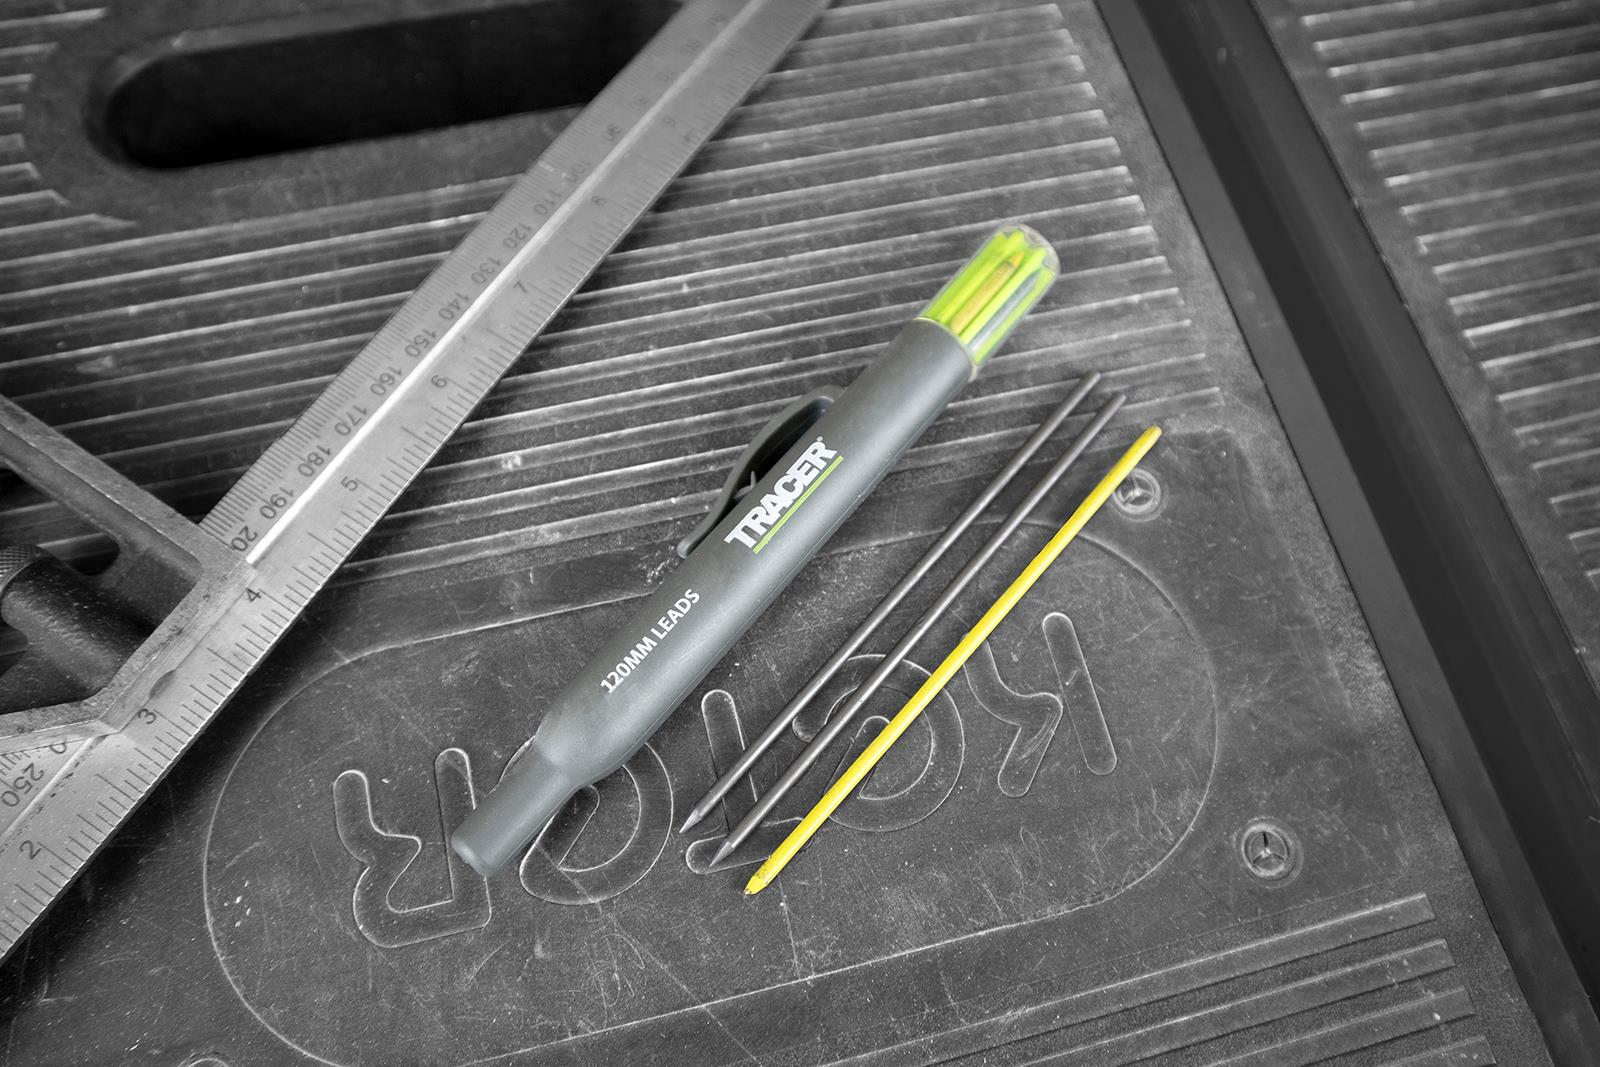 TRACER Complete Marking Kit Deep Hole Marker Pen Pencil and ALH1 Lead Set with Holsters